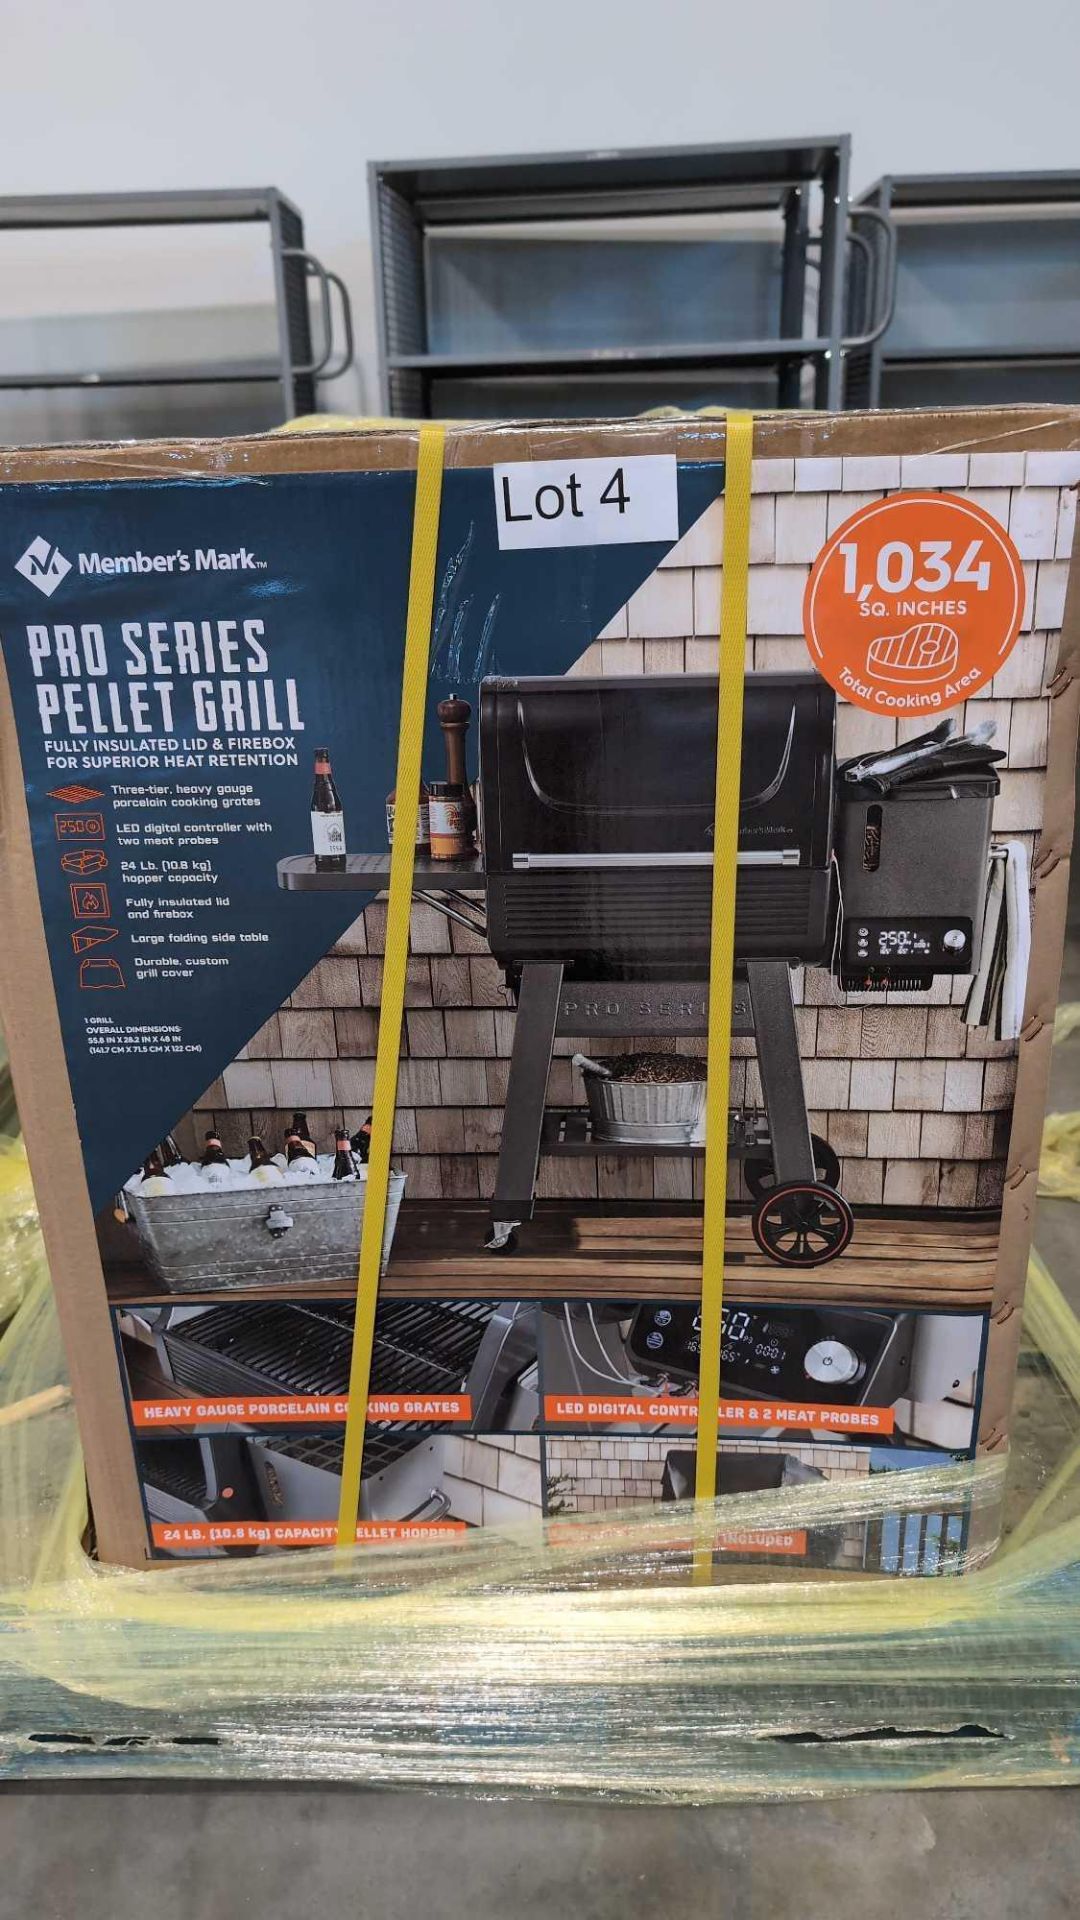 Pro Series Pellet Grill - Image 2 of 4